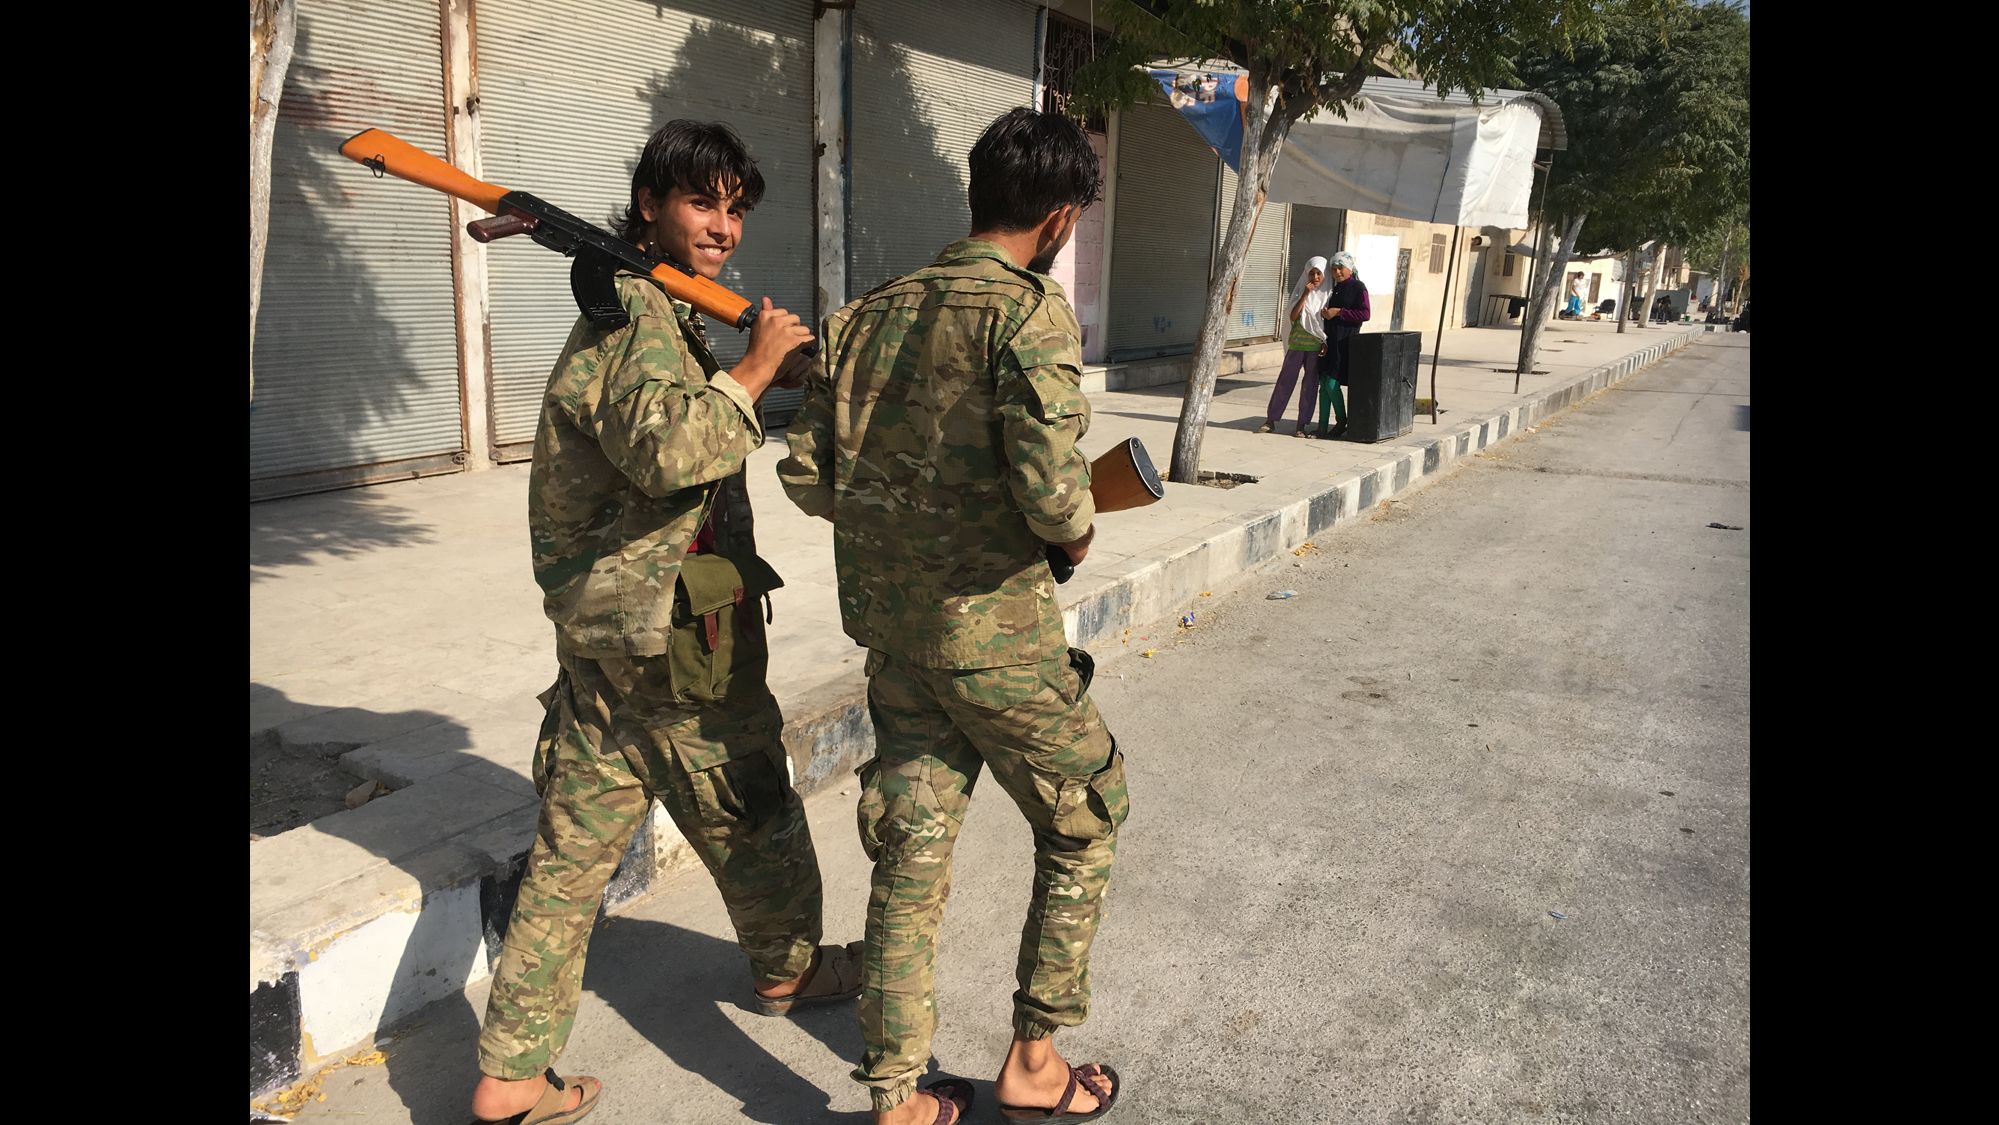 Two Free Syrian Army soldiers stroll down the main street of Jarablus after the city was liberated from ISIS.